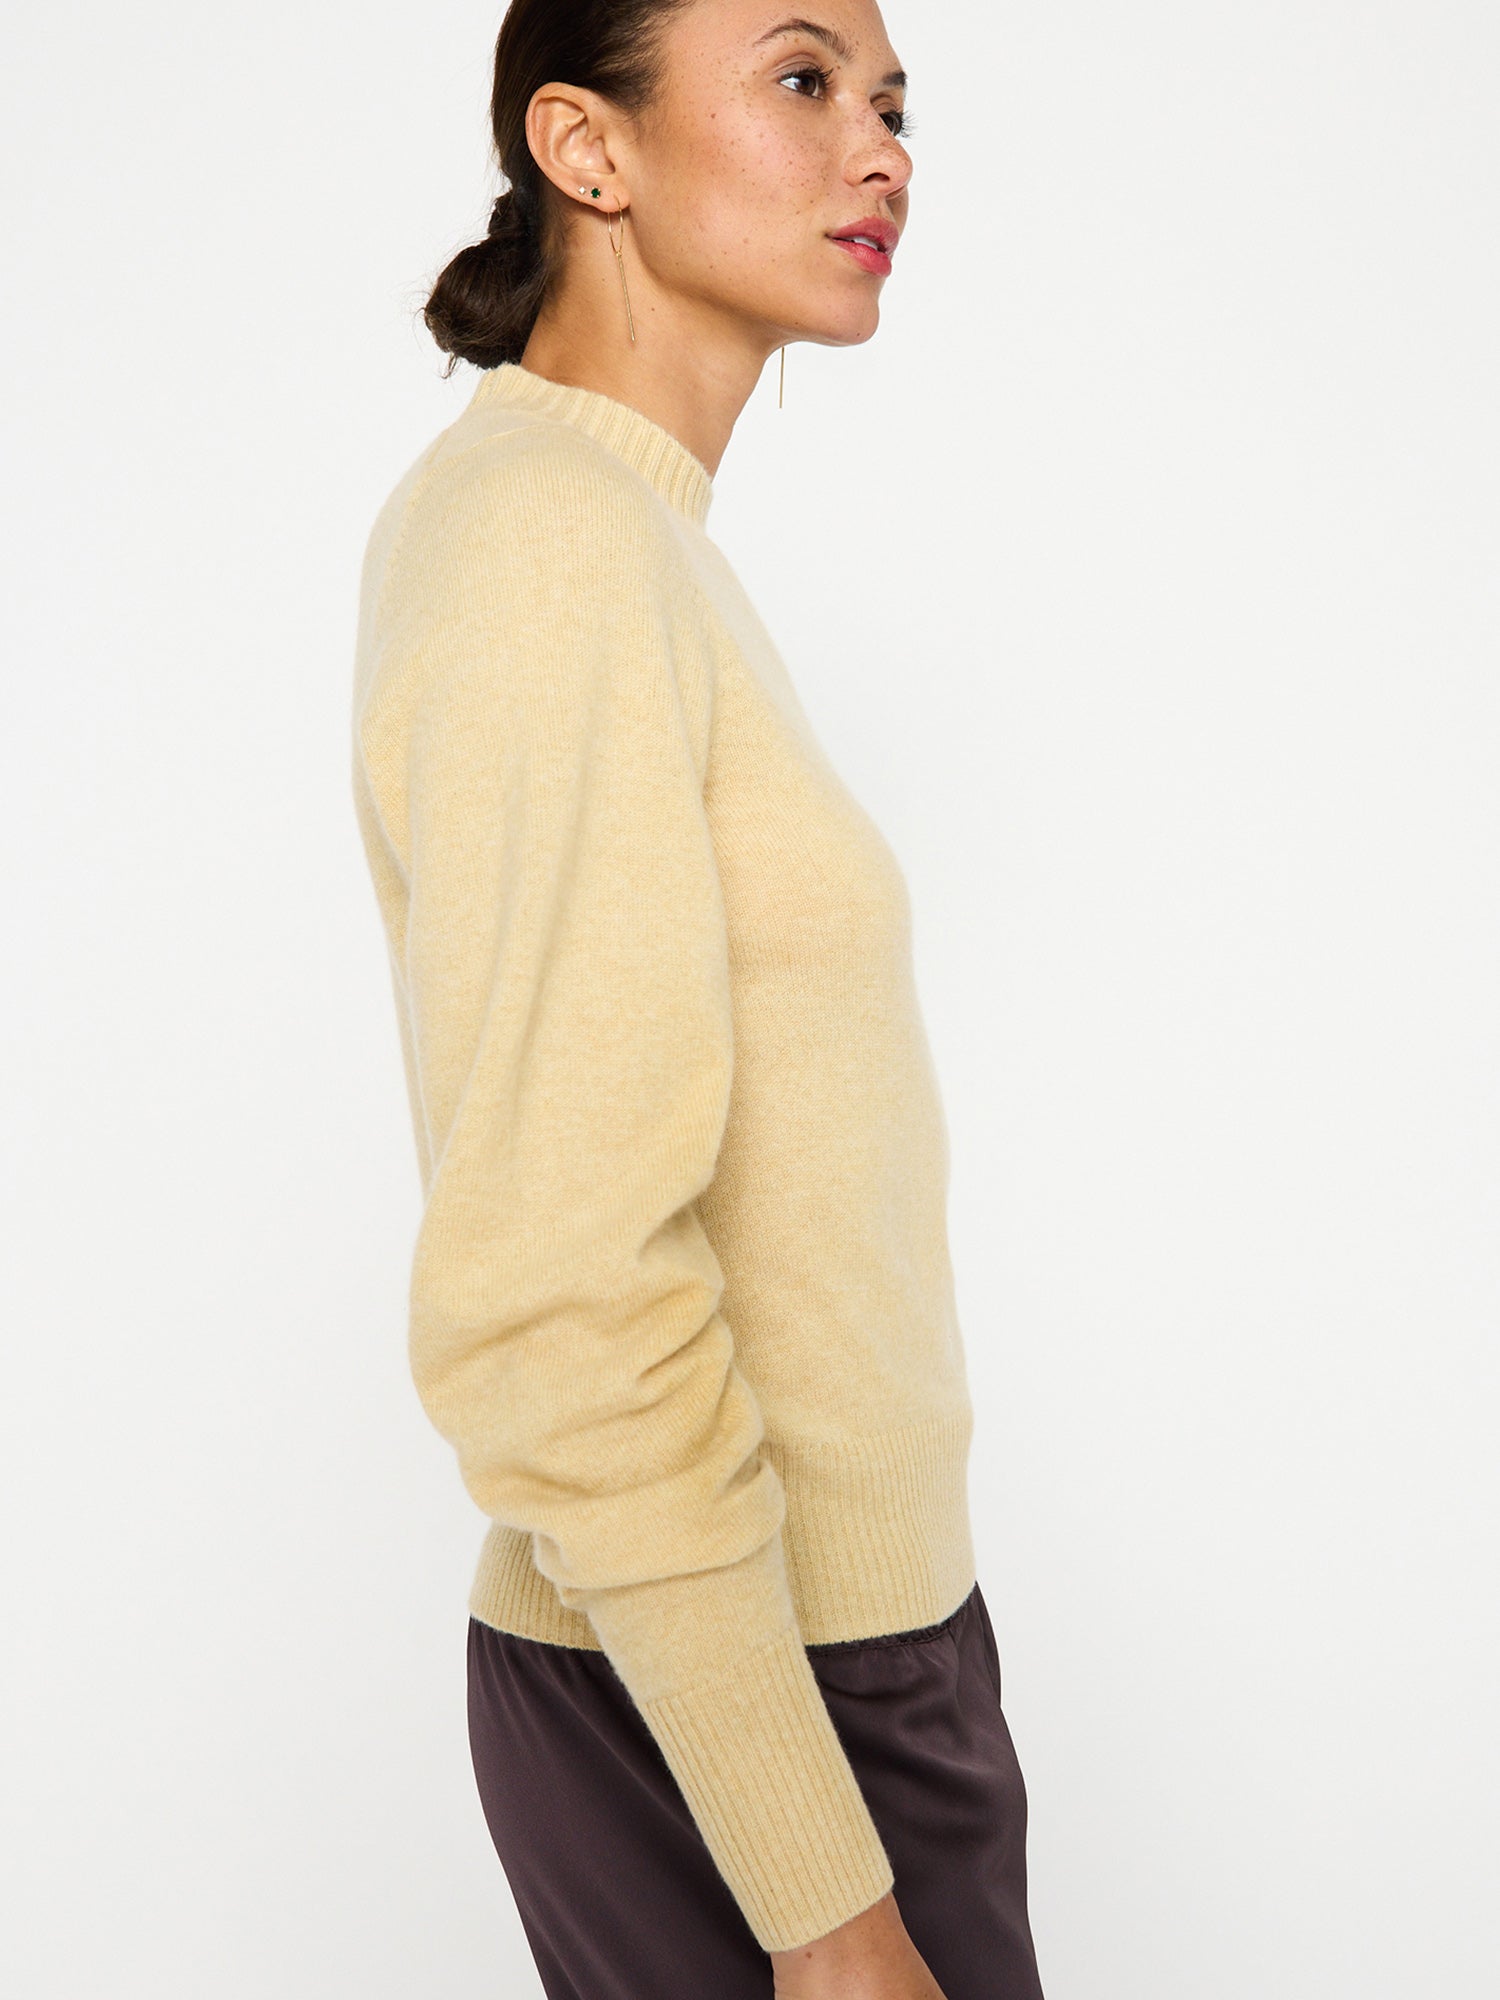 Norde cashmere crewneck yellow sweater side view